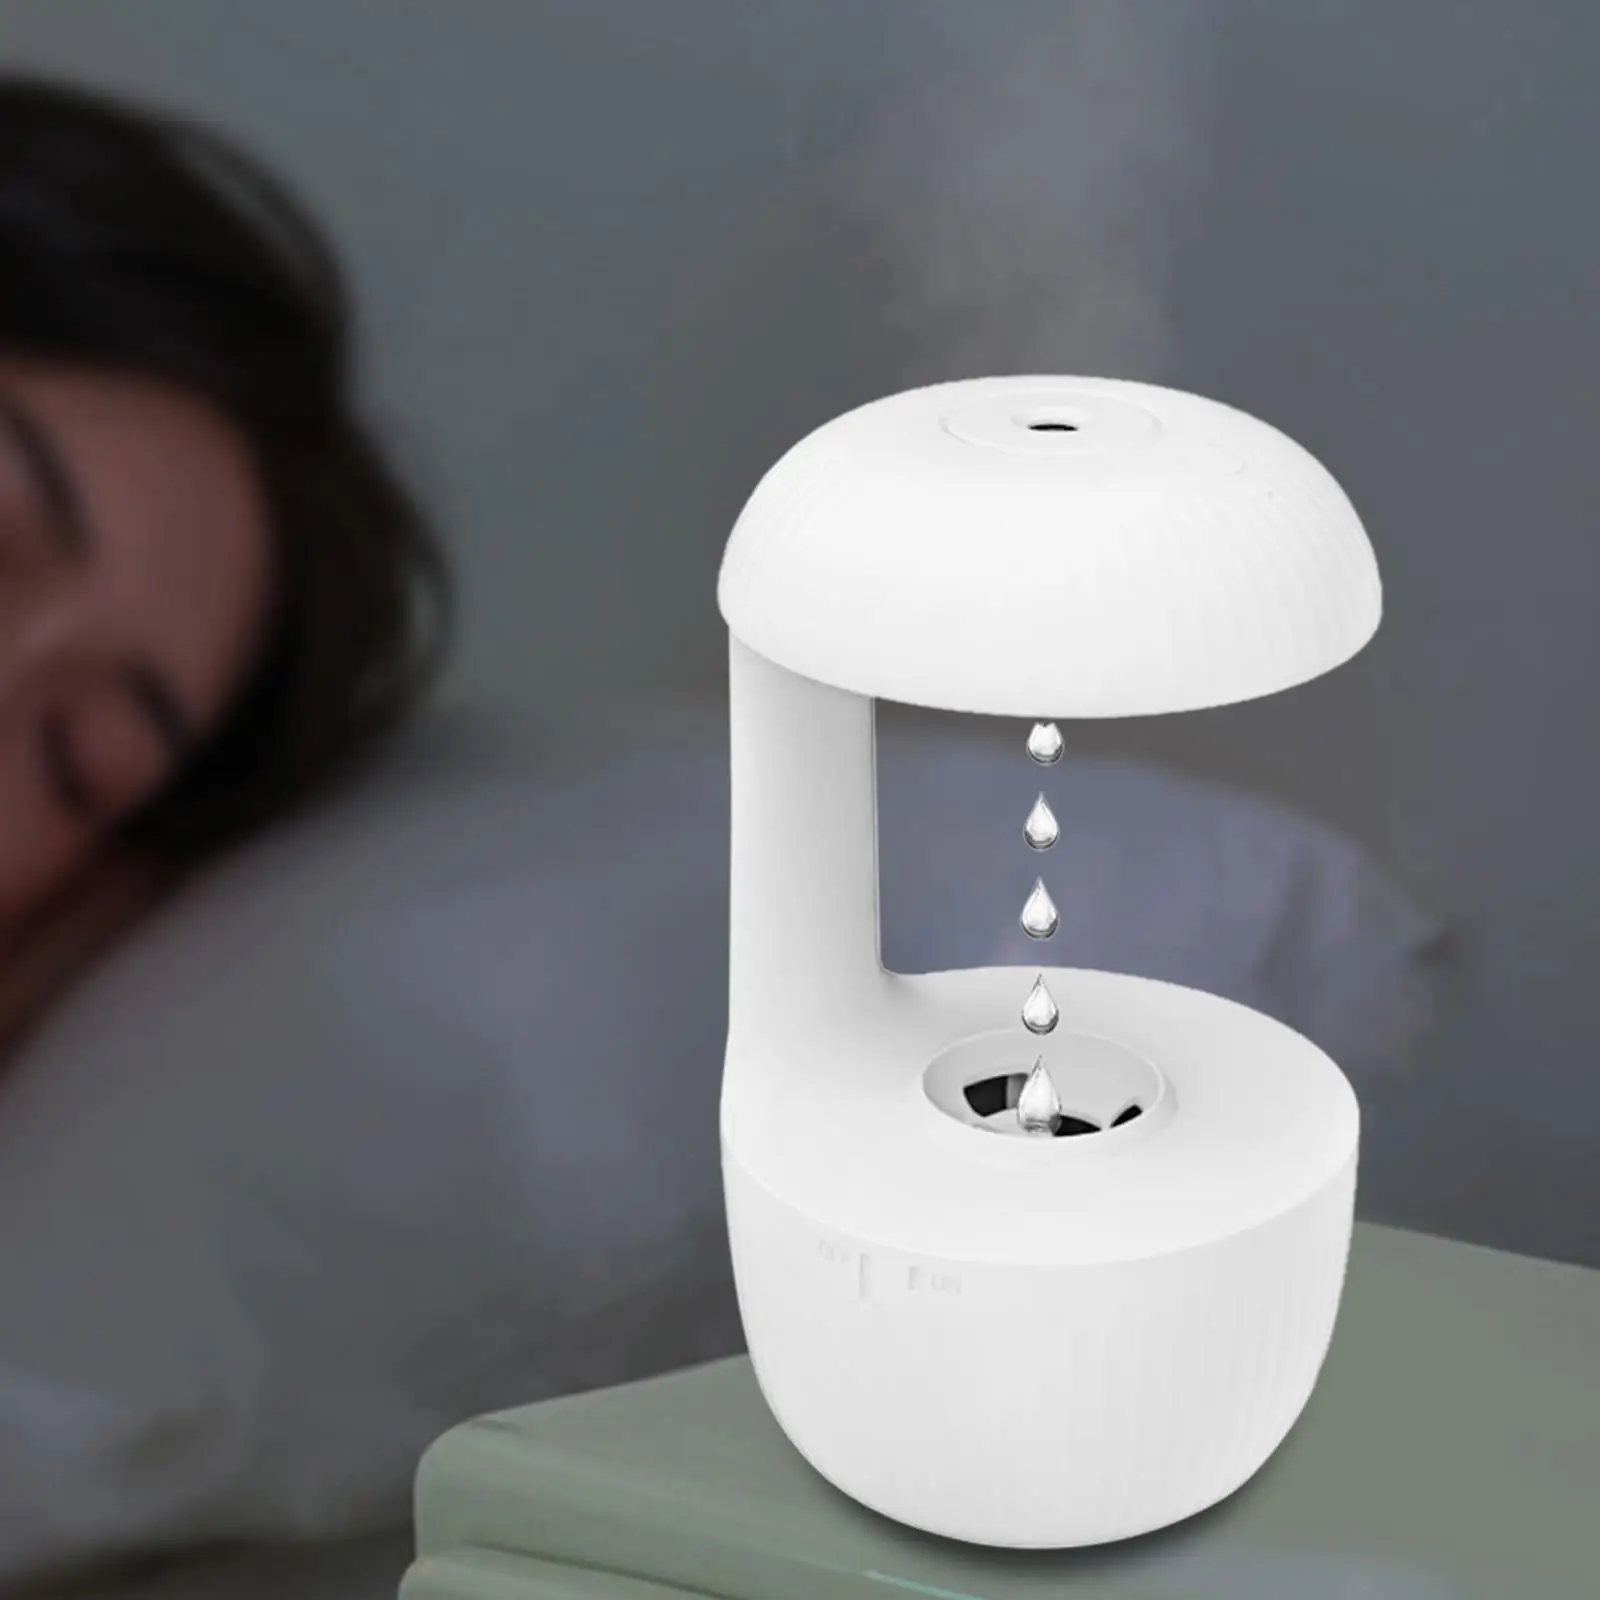 Portable Air Humidifier Night Light Auto Shut Off 600ml Water Tank Low Noise Personal Humidifier for Nursery Home Office Yoga